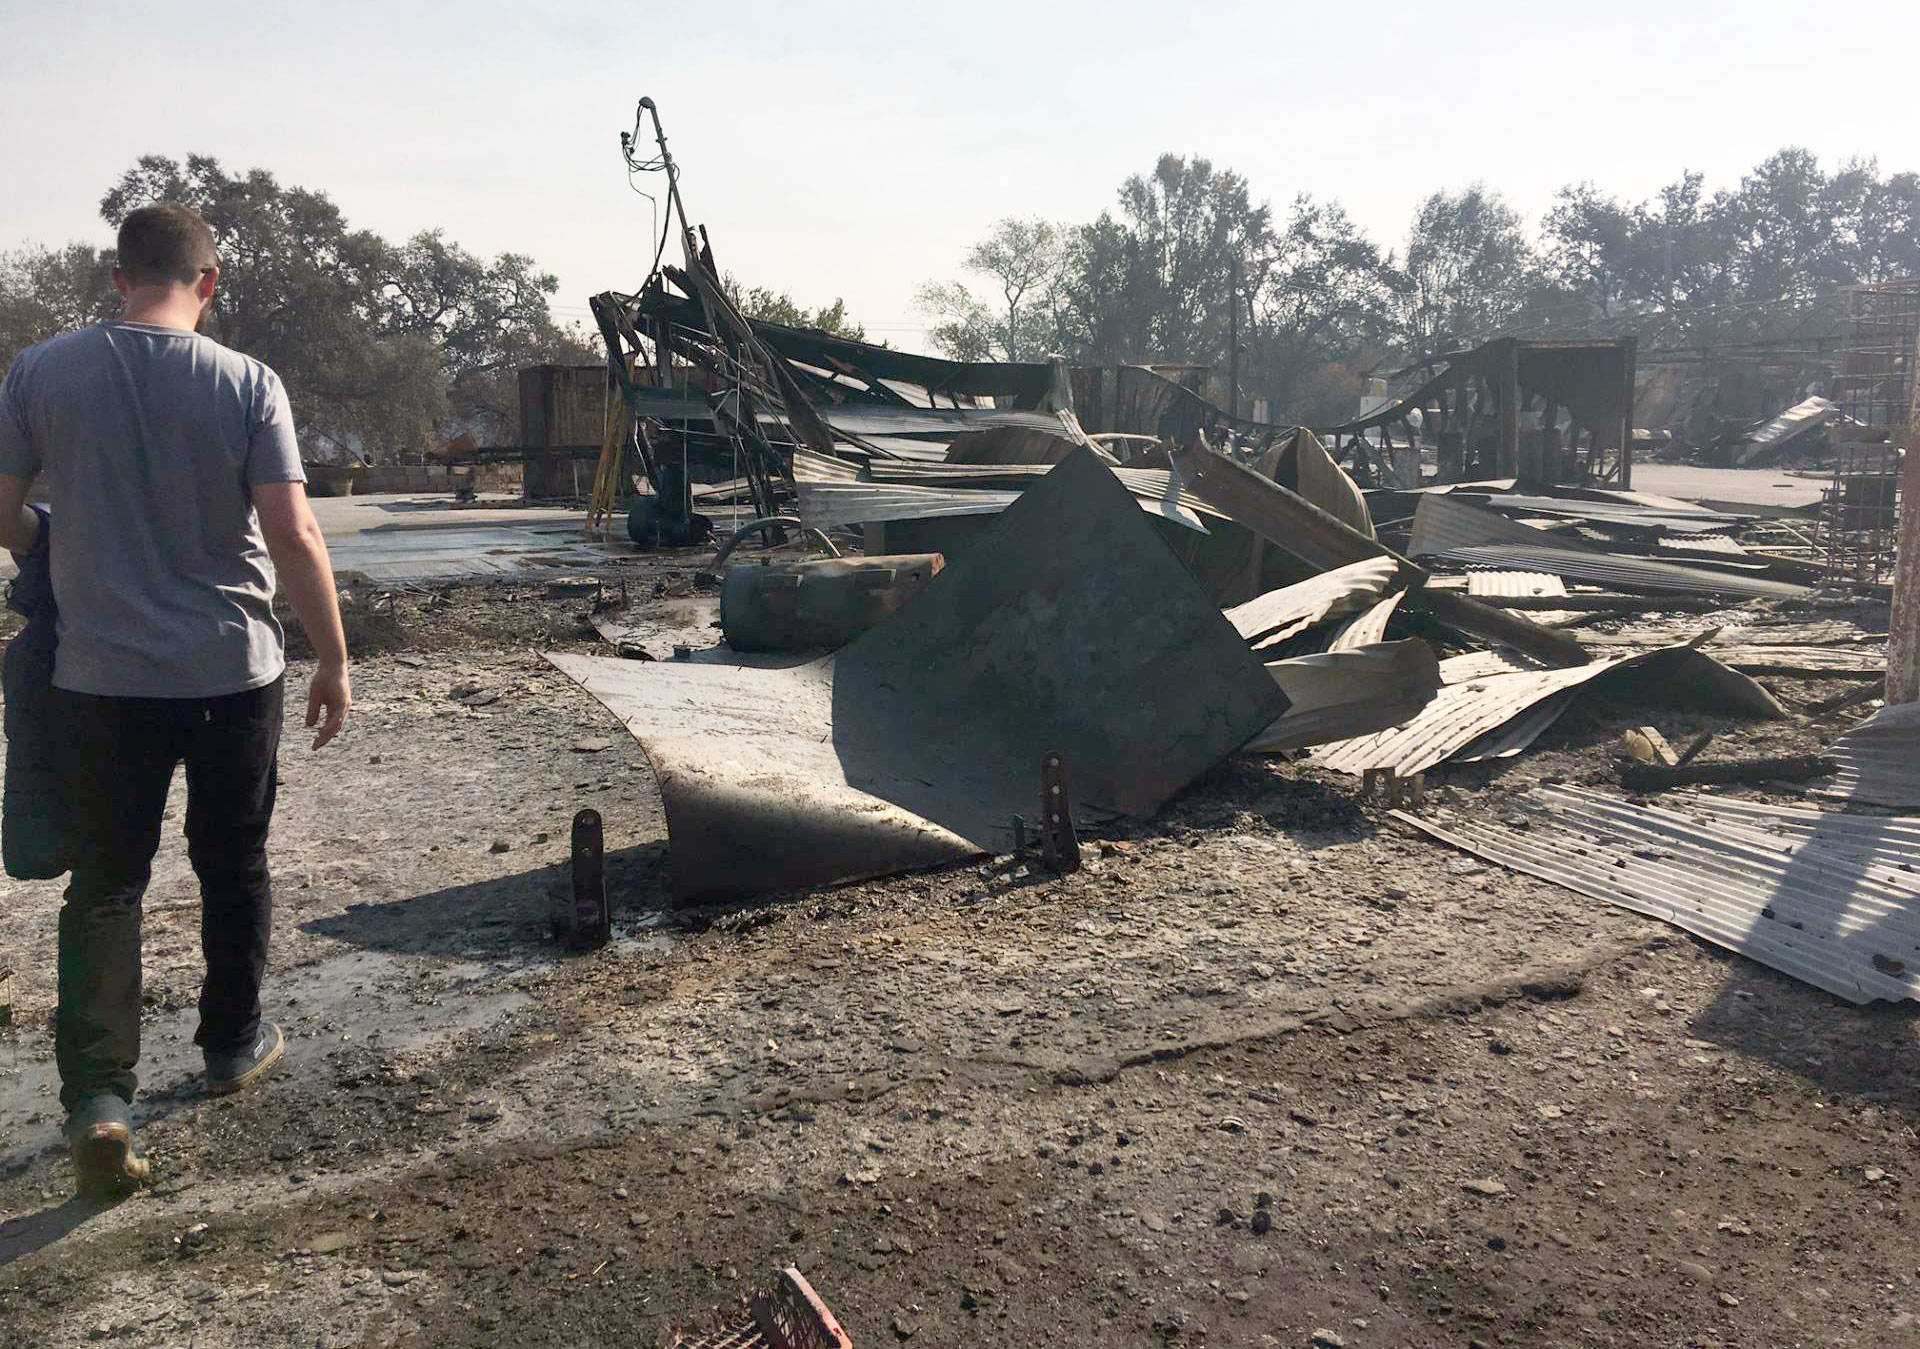 Ned Russell walks through the charred remains of his farm. Tonya Mosley/KQED